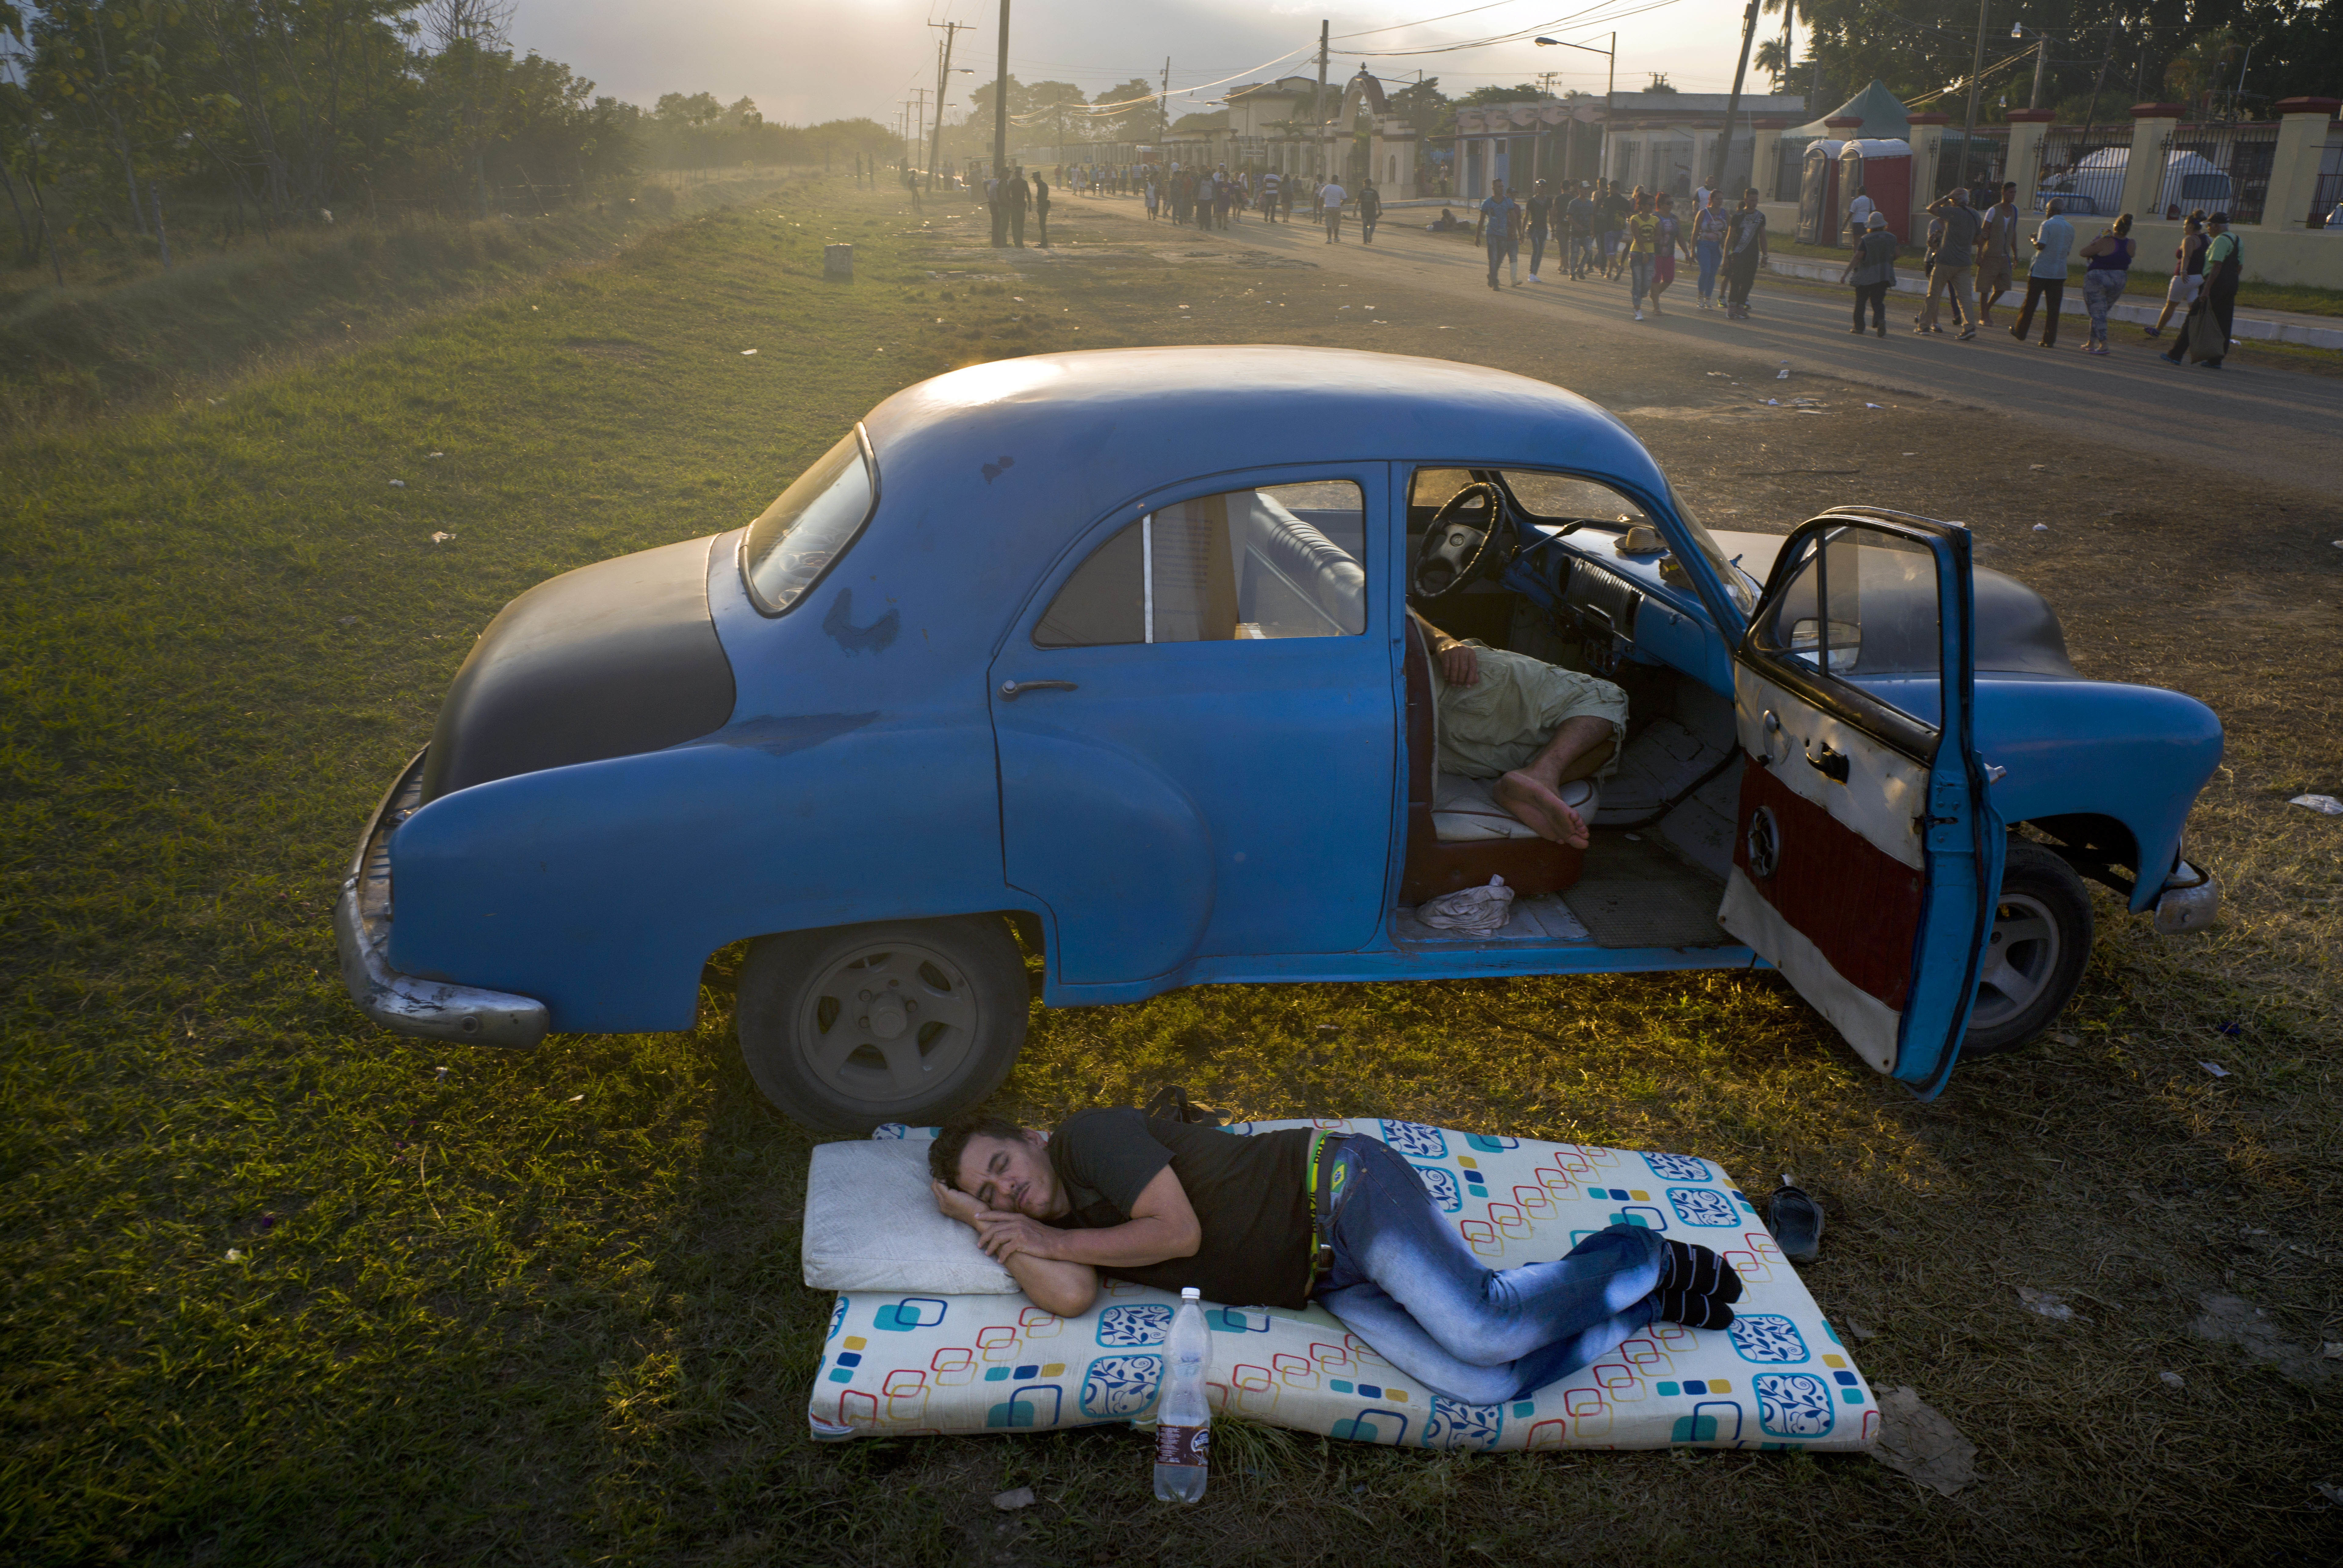 Men rest while waiting for a Mass in honor of the Catholic Saint Lazarus, to be held at the church in El Rincon, an area of Santiago de las Vegas, Cuba, as the sun sets Friday, Dec. 16, 2016. Saturday marks the second year since the start of negotiations between Cuba and U.S. to restore diplomatic ties. Saint Lazarus' feast day is every Dec. 17. (AP Photo/Ramon Espinosa)